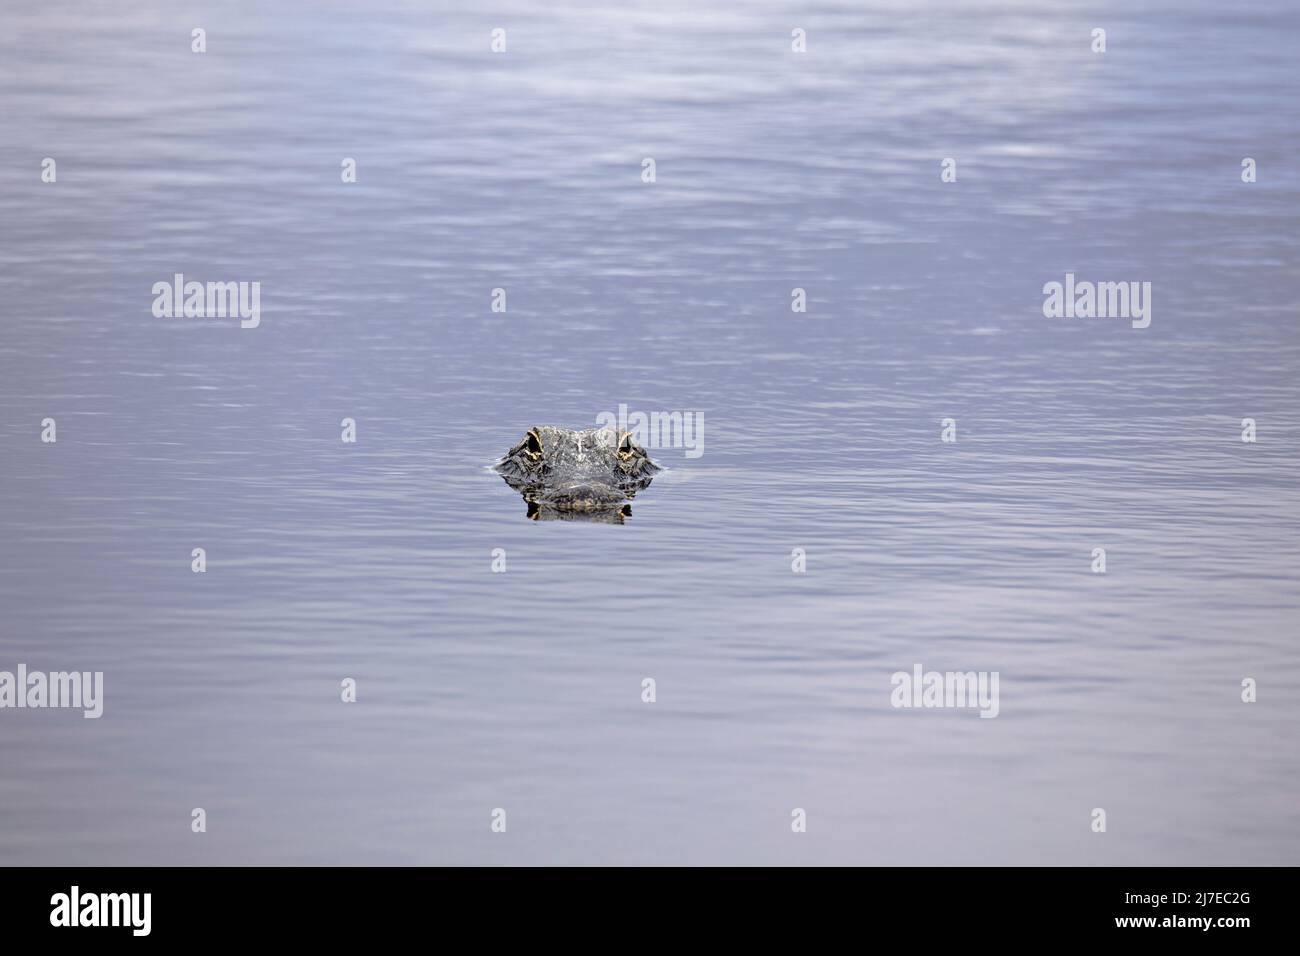 Florida Gator with its head above the water looking at the camera Stock Photo